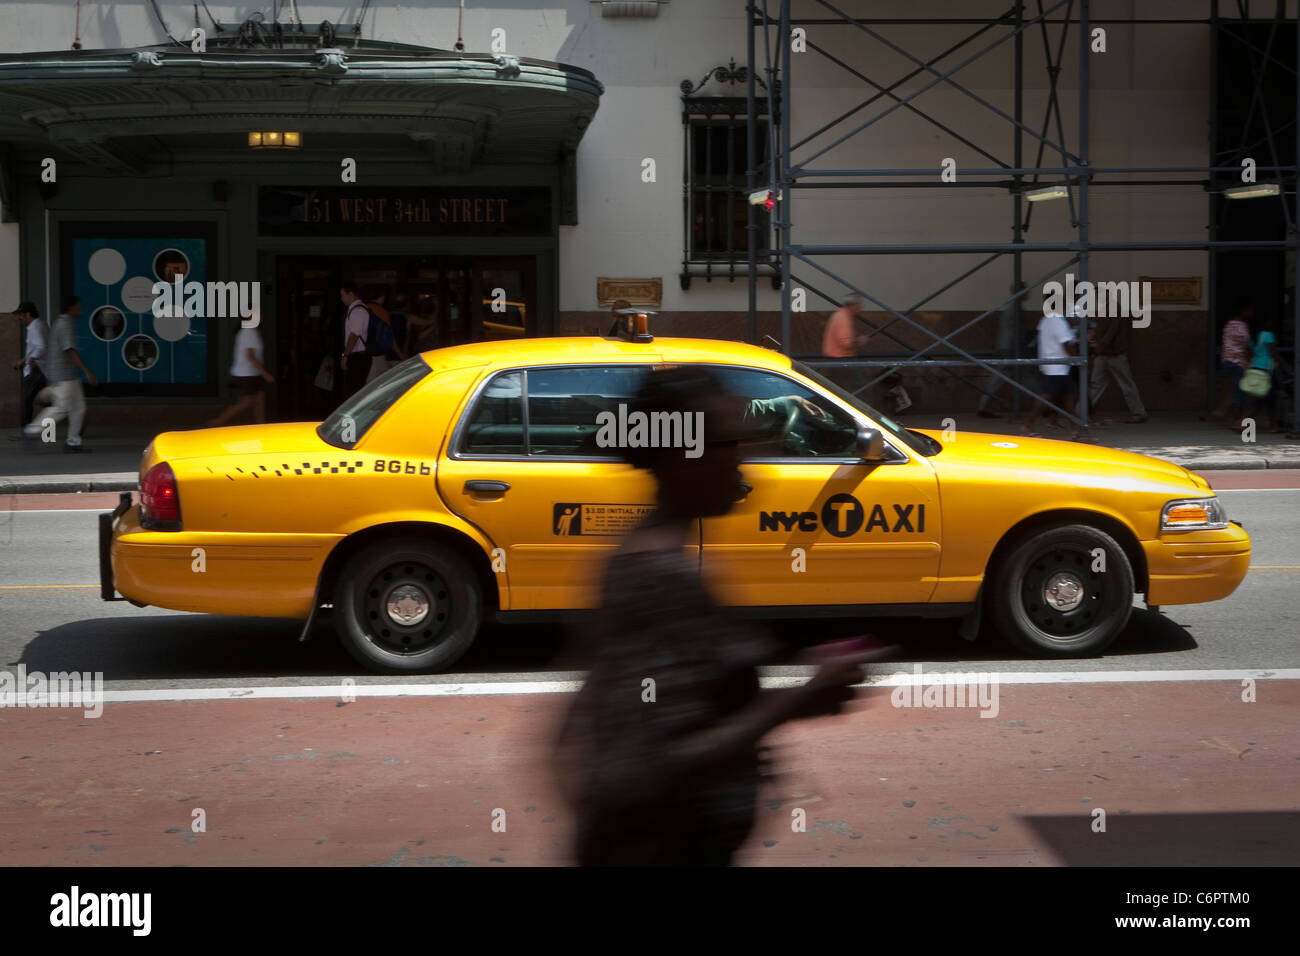 A woman walks by a NYC Taxi in the New York City borough of Manhattan, NY, Tuesday August 2, 2011. Stock Photo